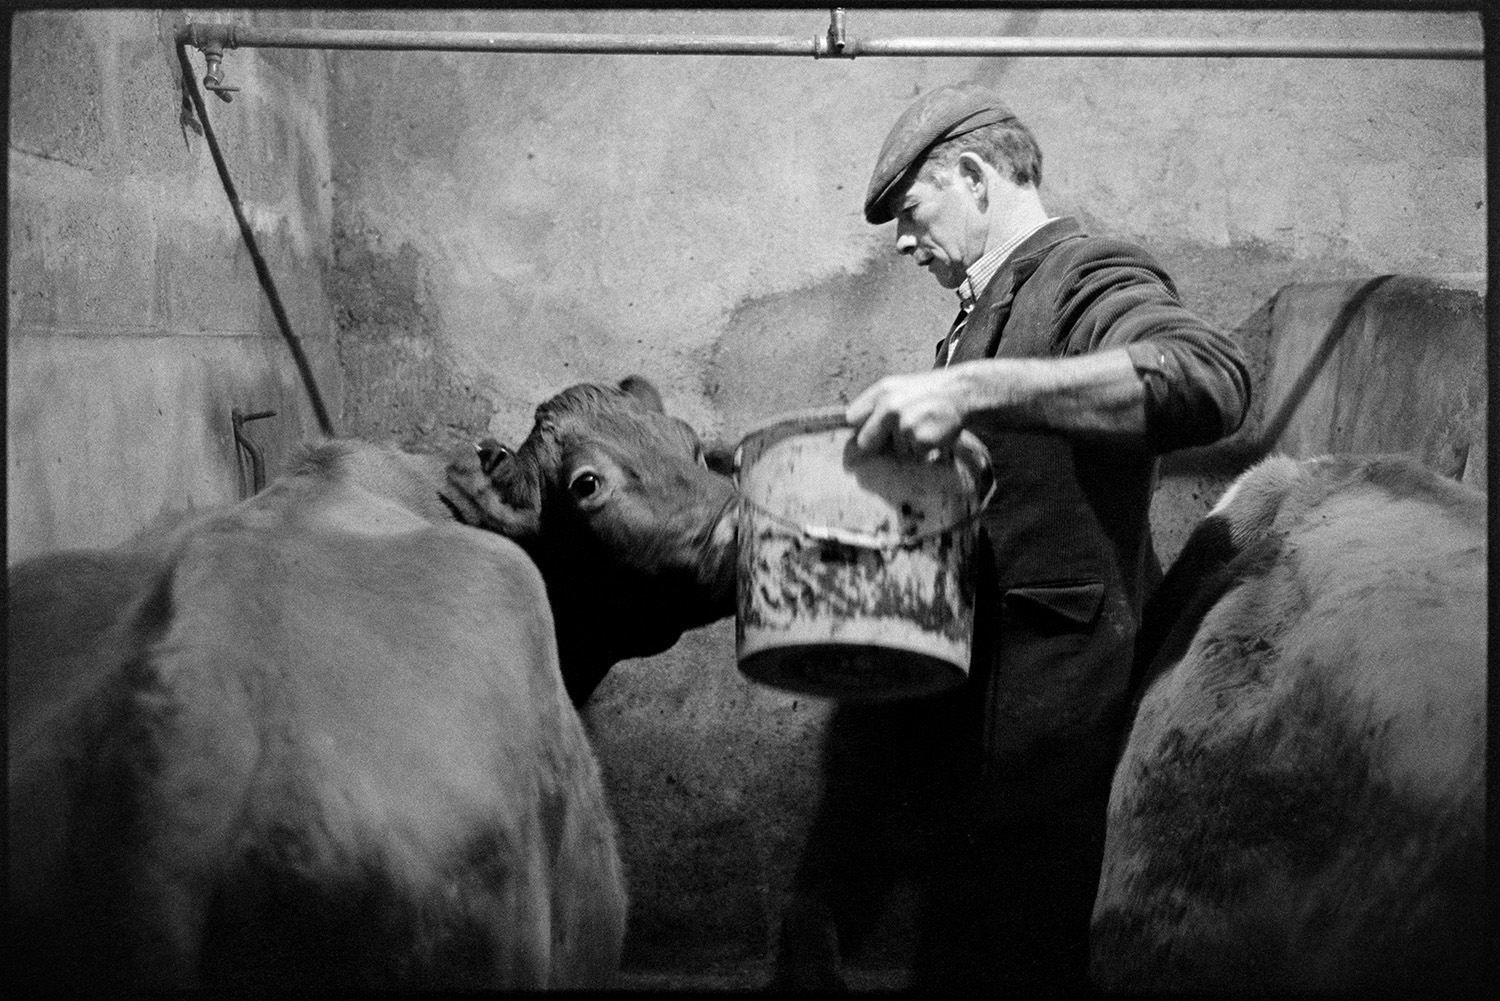 Farmer feeding cows in shed. 
[Jim Woolacott feeding a cow from a bucket, in a shed at Verdun, Atherington,]